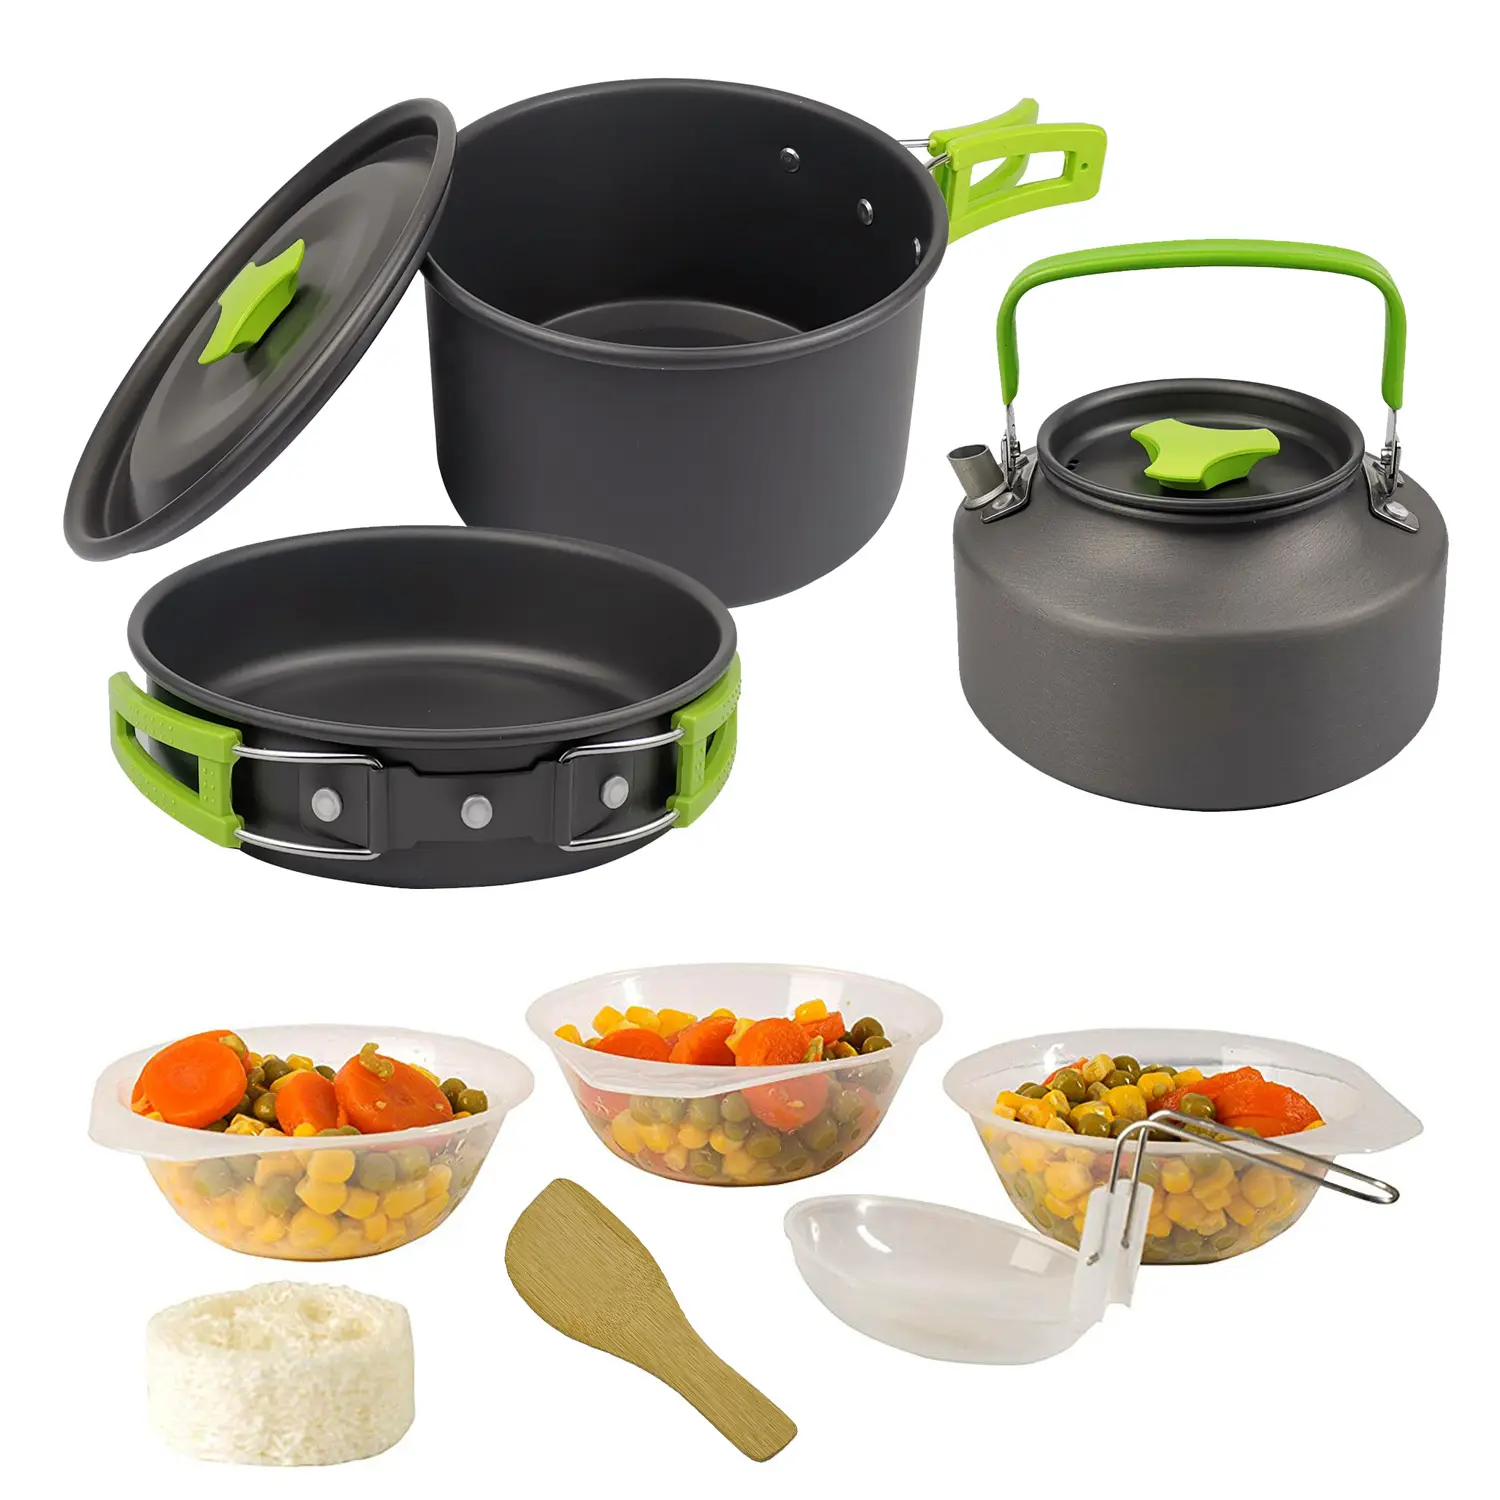 Your city  Hot Sale 2 3 Person Camping Cookset Outdoor Picnic Mess Set Camping Cookware With Factory Price Camping Utensils